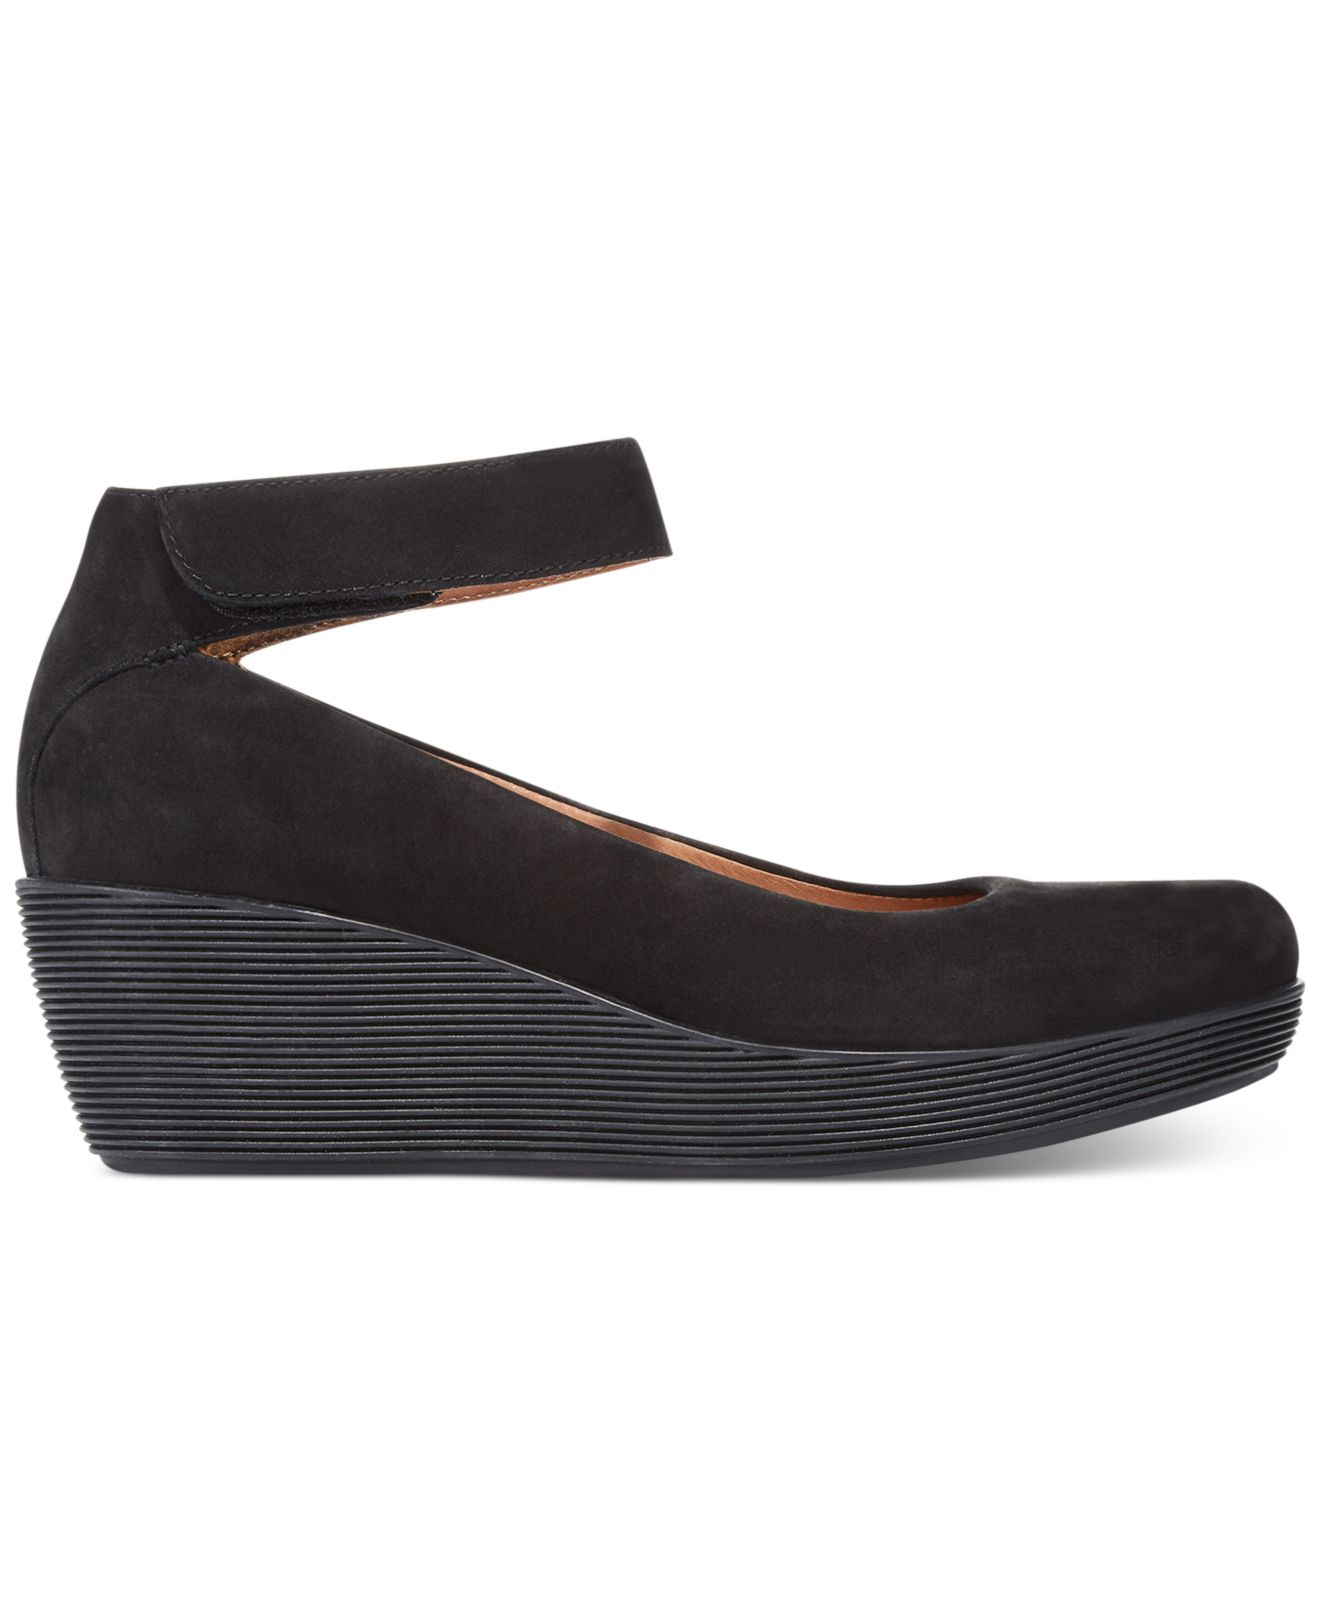 clarks wedges shoes